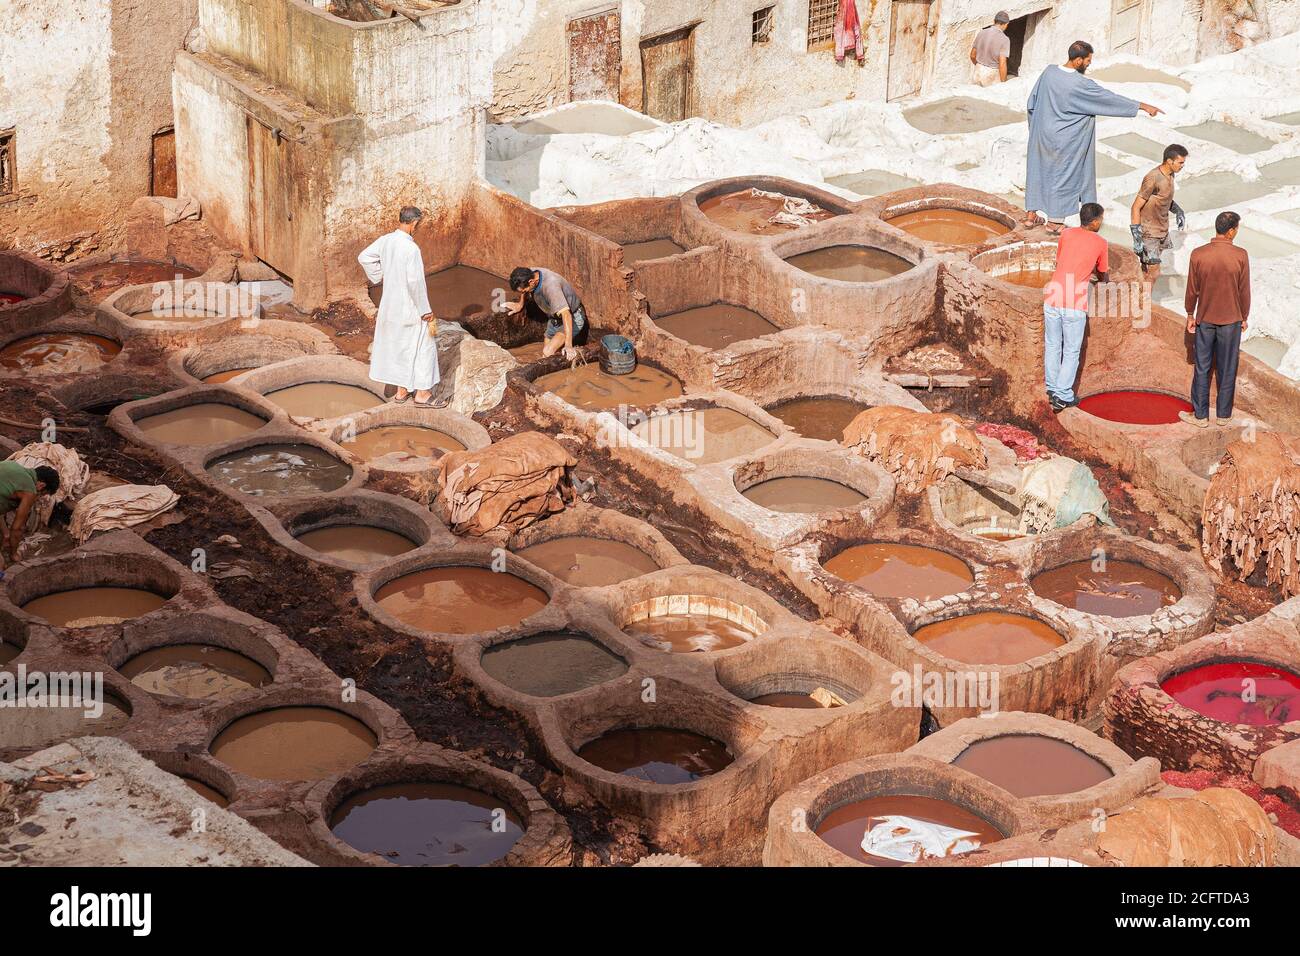 Men working in the tanneries, Fez, Morocco Stock Photo